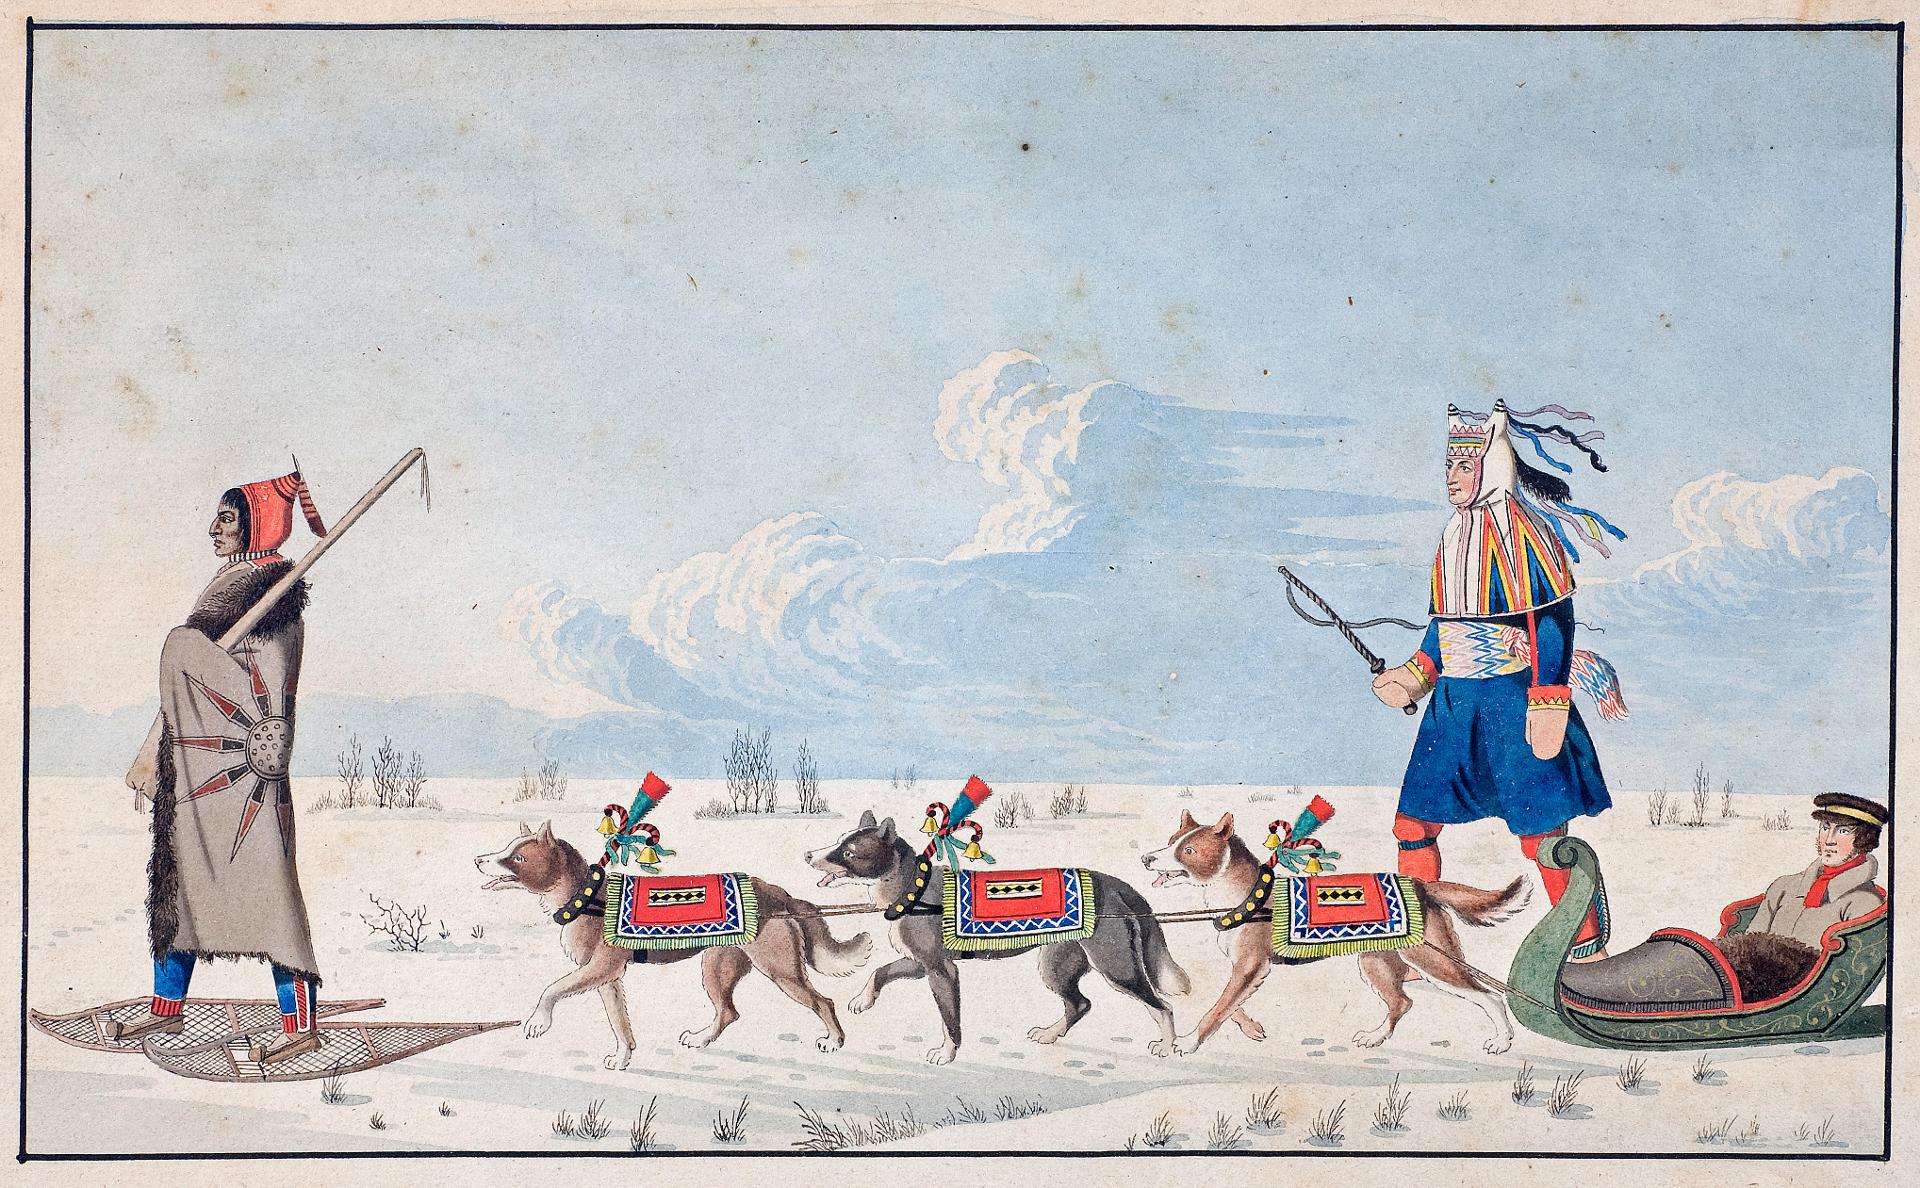 Peter Rindisbacher (1806-1834) - A Dog Cariole only used in winter by Canadian Indians